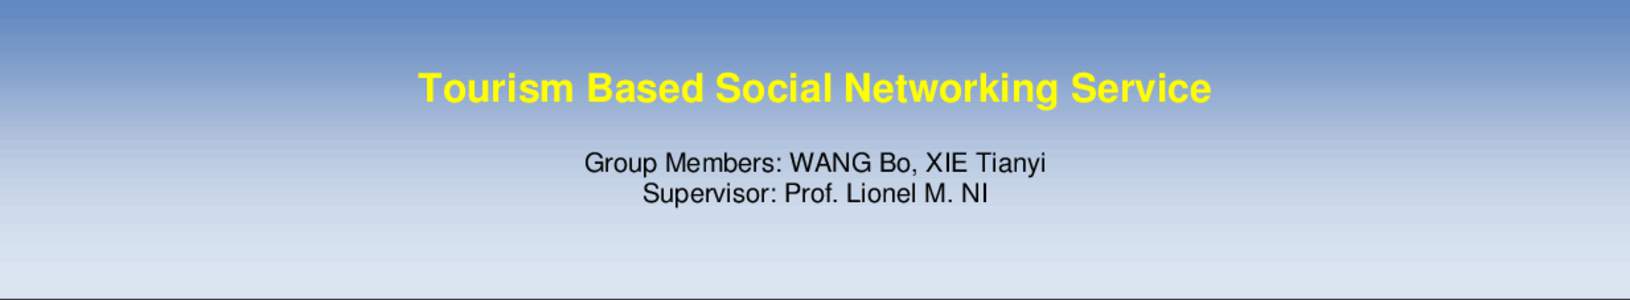 Tourism Based Social Networking Service Group Members: WANG Bo, XIE Tianyi Supervisor: Prof. Lionel M. NI Overview  In recent years, Social Networking Services have been playing an